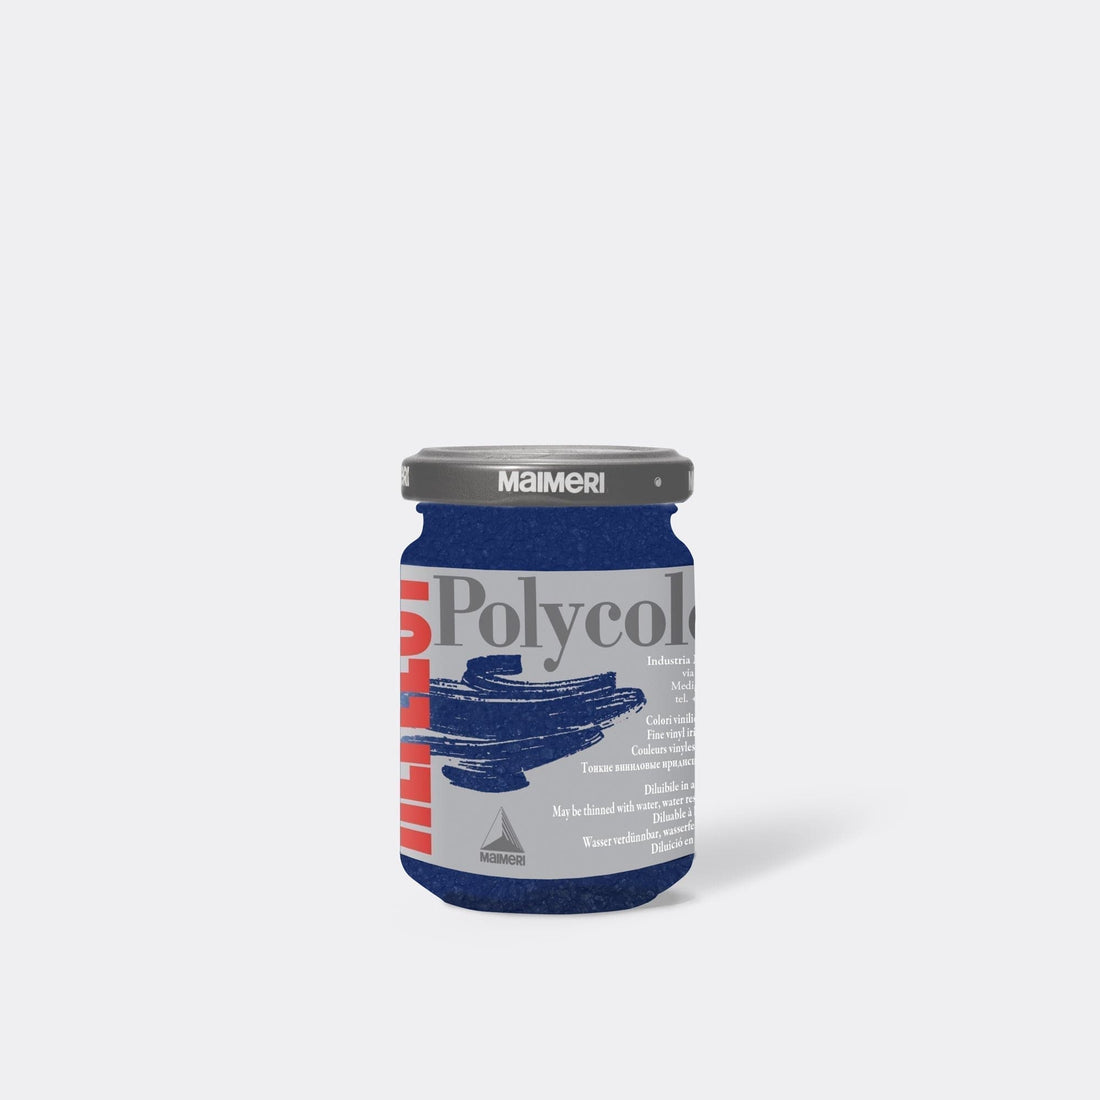 PYCOLOR REFLECT CYAN 140 ML - best price from Maltashopper.com BR480480216